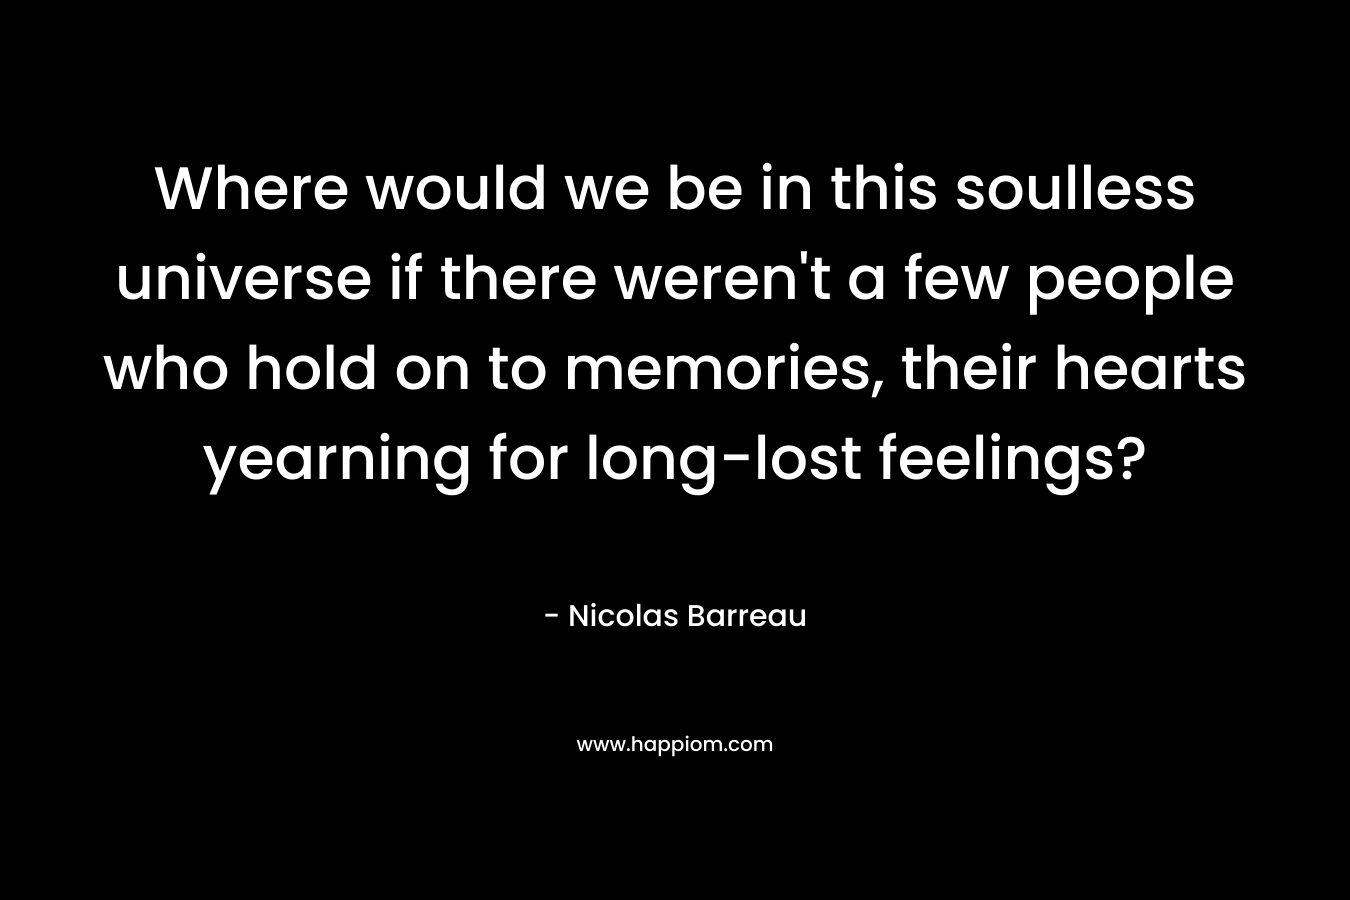 Where would we be in this soulless universe if there weren’t a few people who hold on to memories, their hearts yearning for long-lost feelings? – Nicolas Barreau